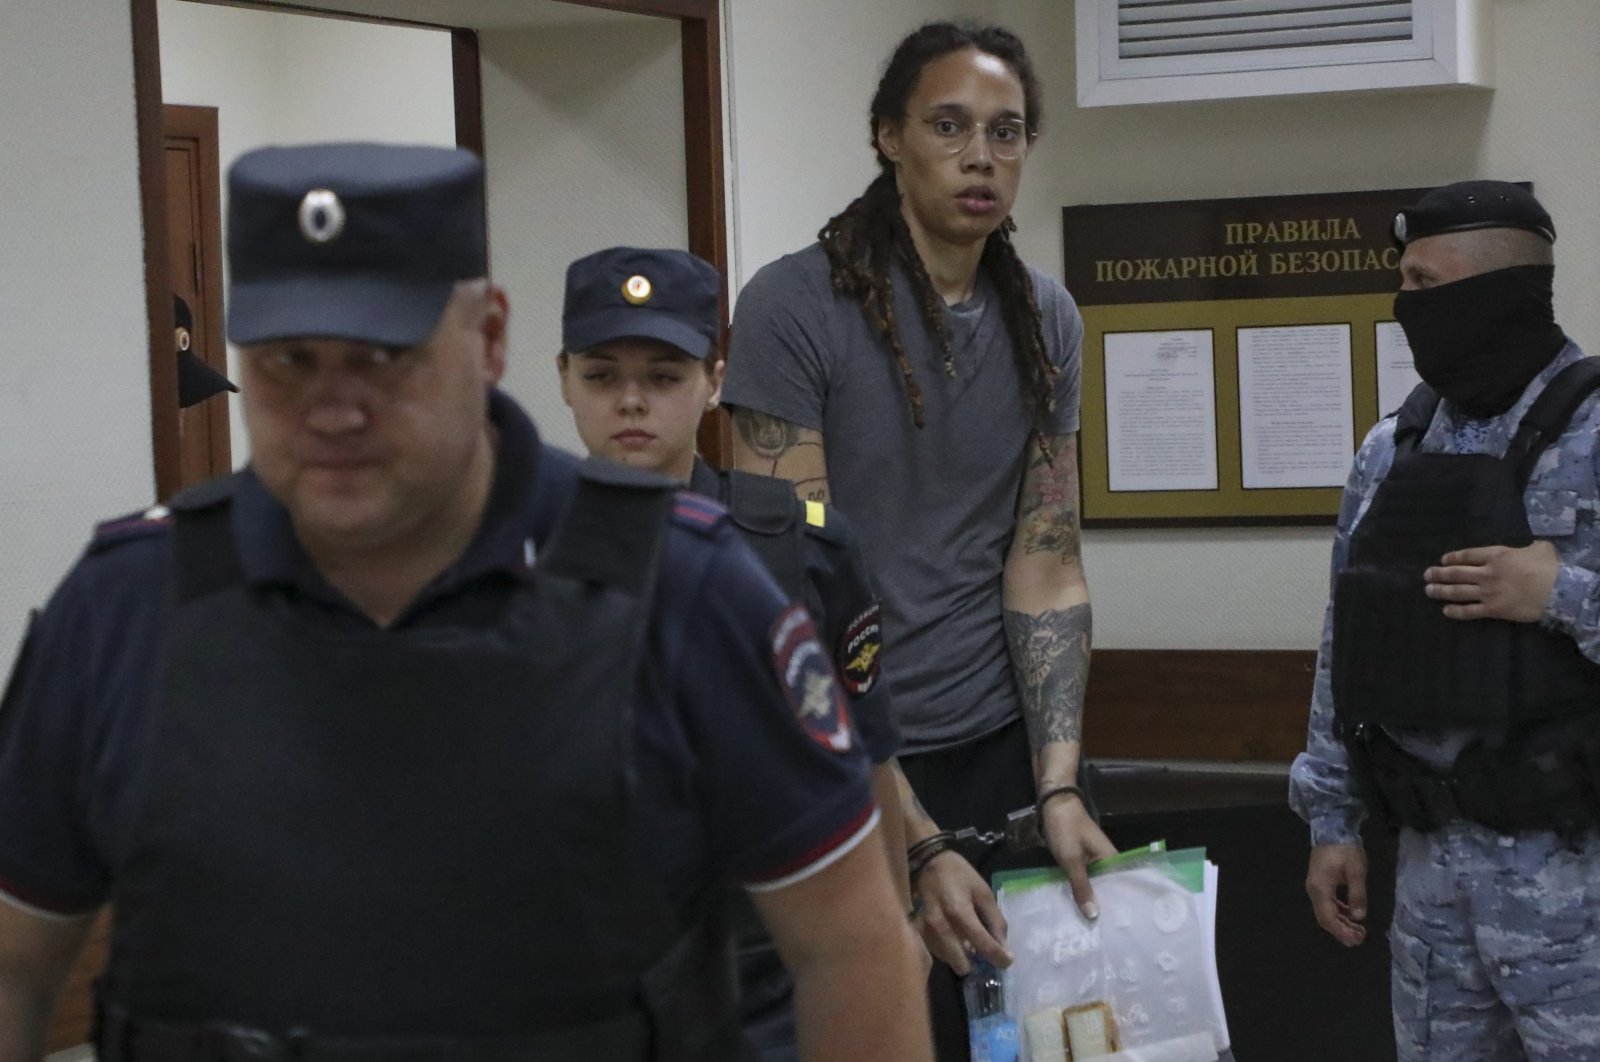 Brittney Griner (C) is escorted to a courtroom for a hearing in Khimki, Russia, Aug. 4, 2022. (EPA PHOTO) 